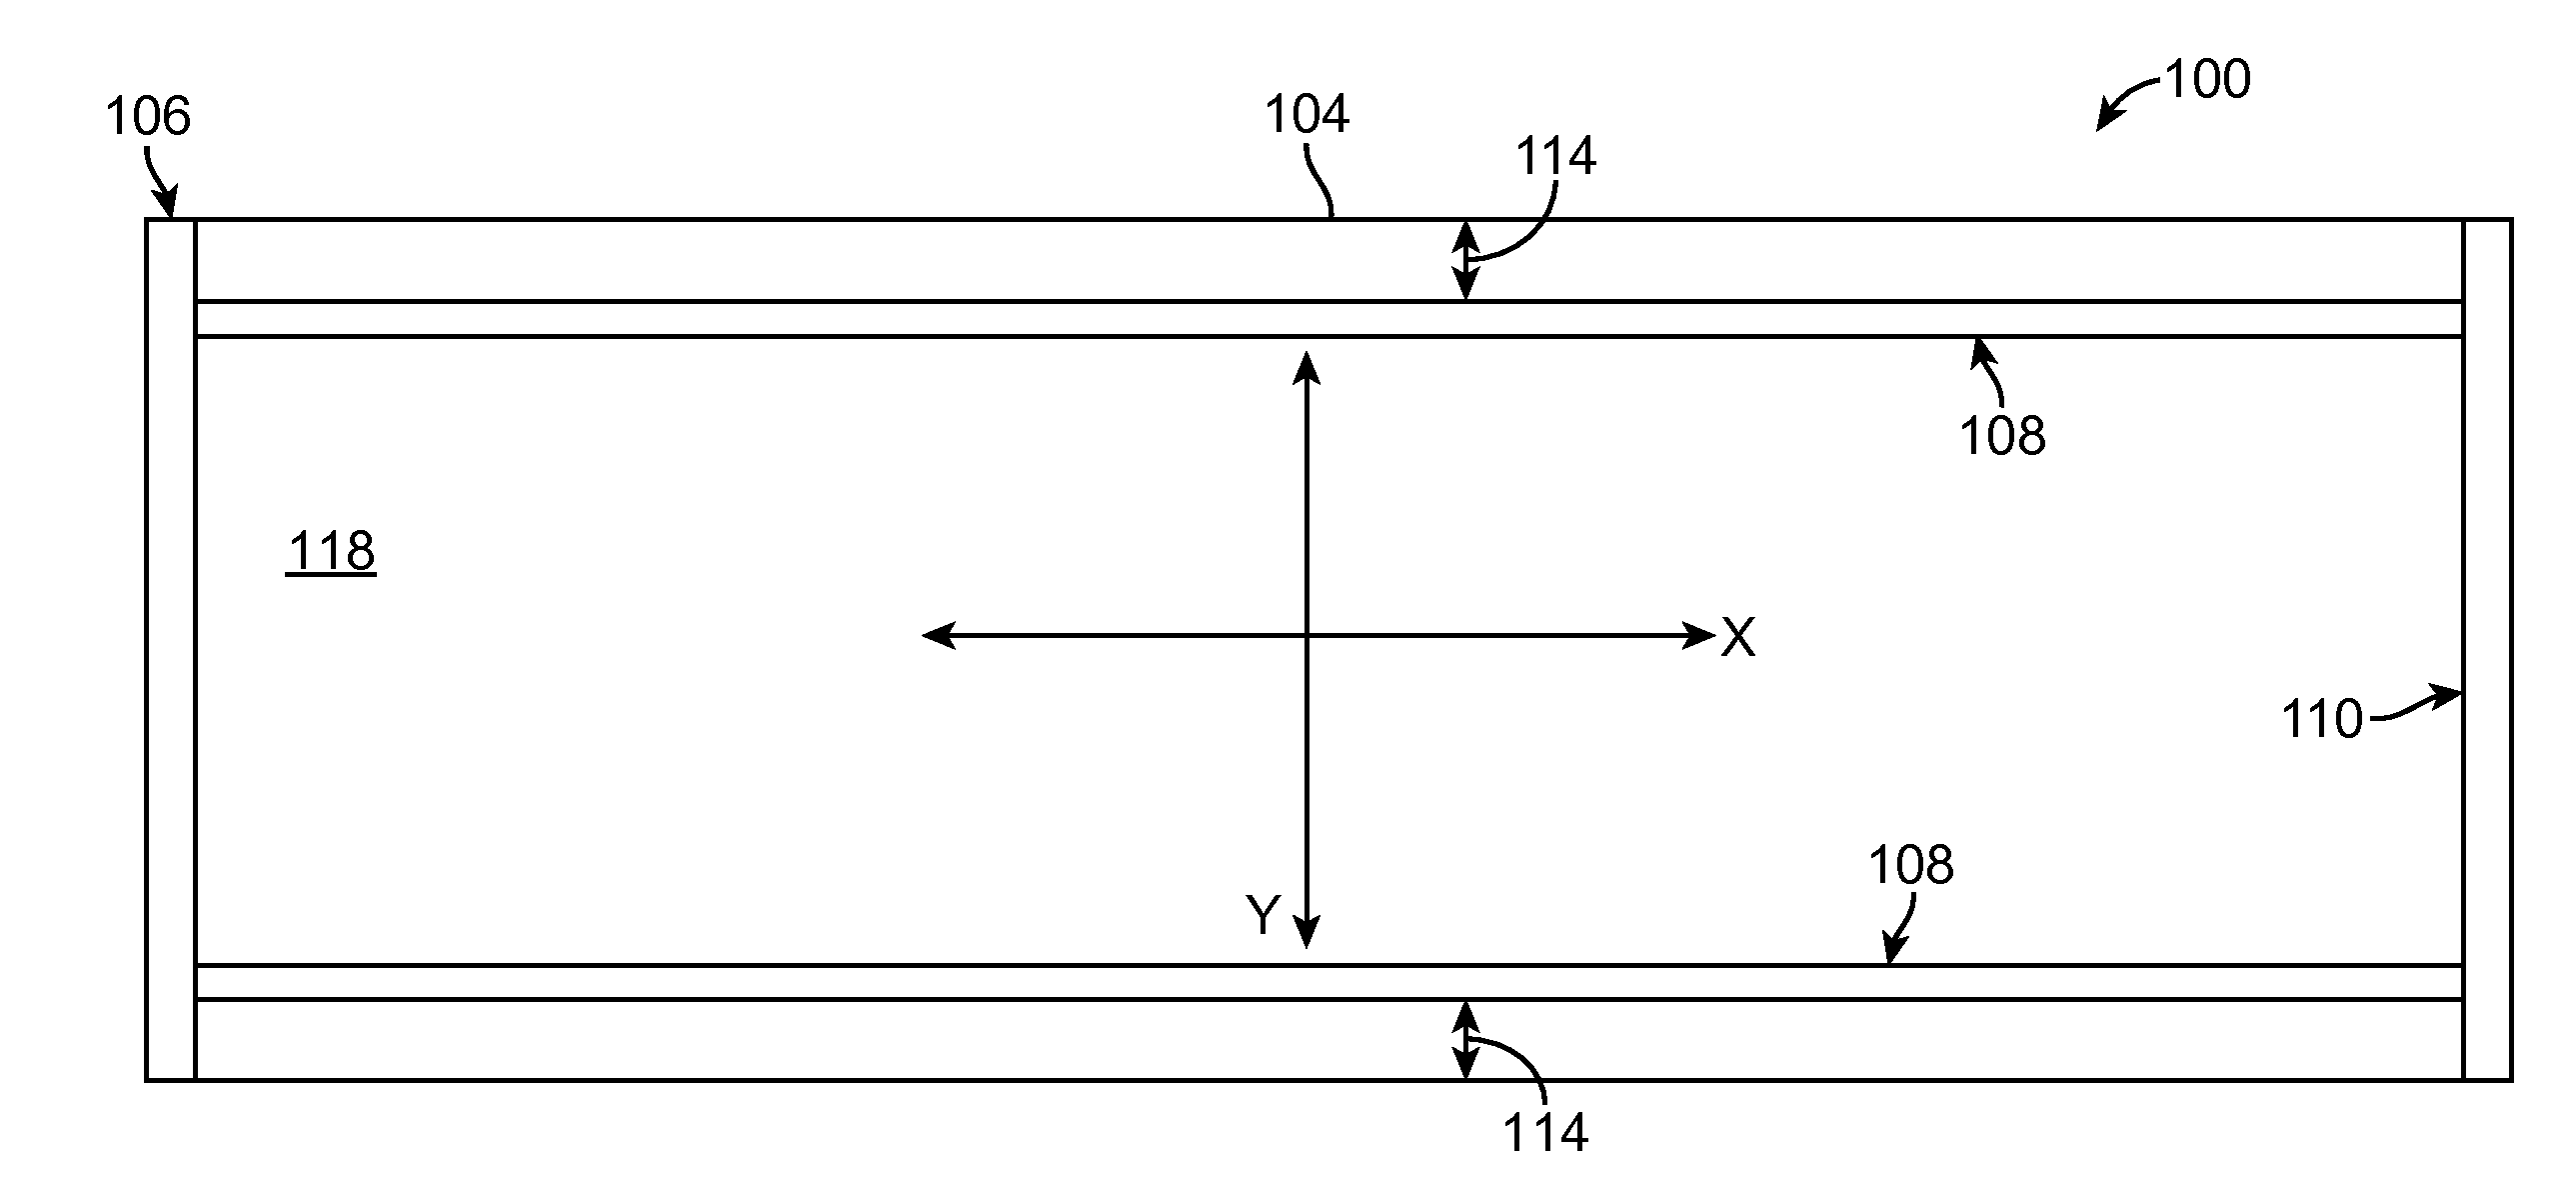 Device with roll mechanism